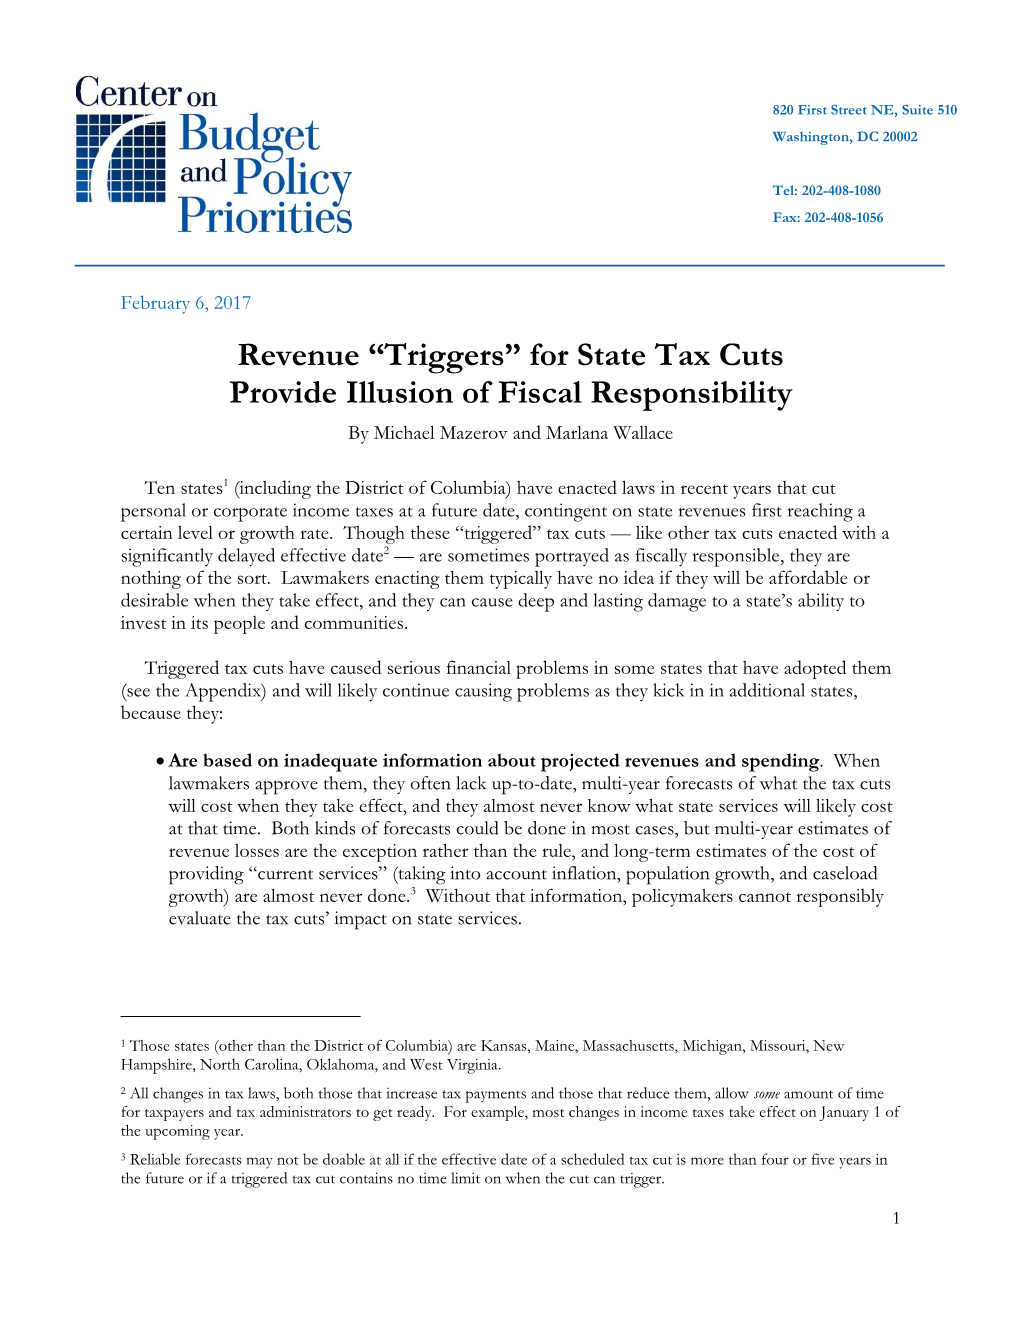 Triggers” for State Tax Cuts Provide Illusion of Fiscal Responsibility by Michael Mazerov and Marlana Wallace